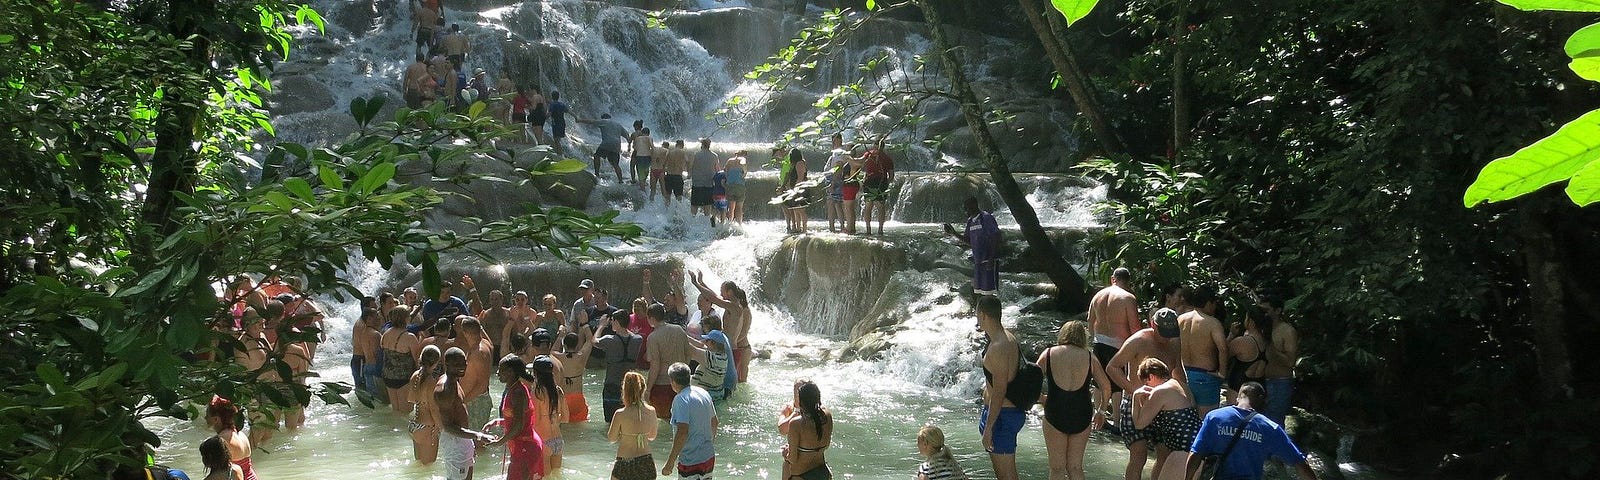 A picture of Dunn’s River Falls, many people are walking up the falls dressed in swim suits or shorts and t-shirts